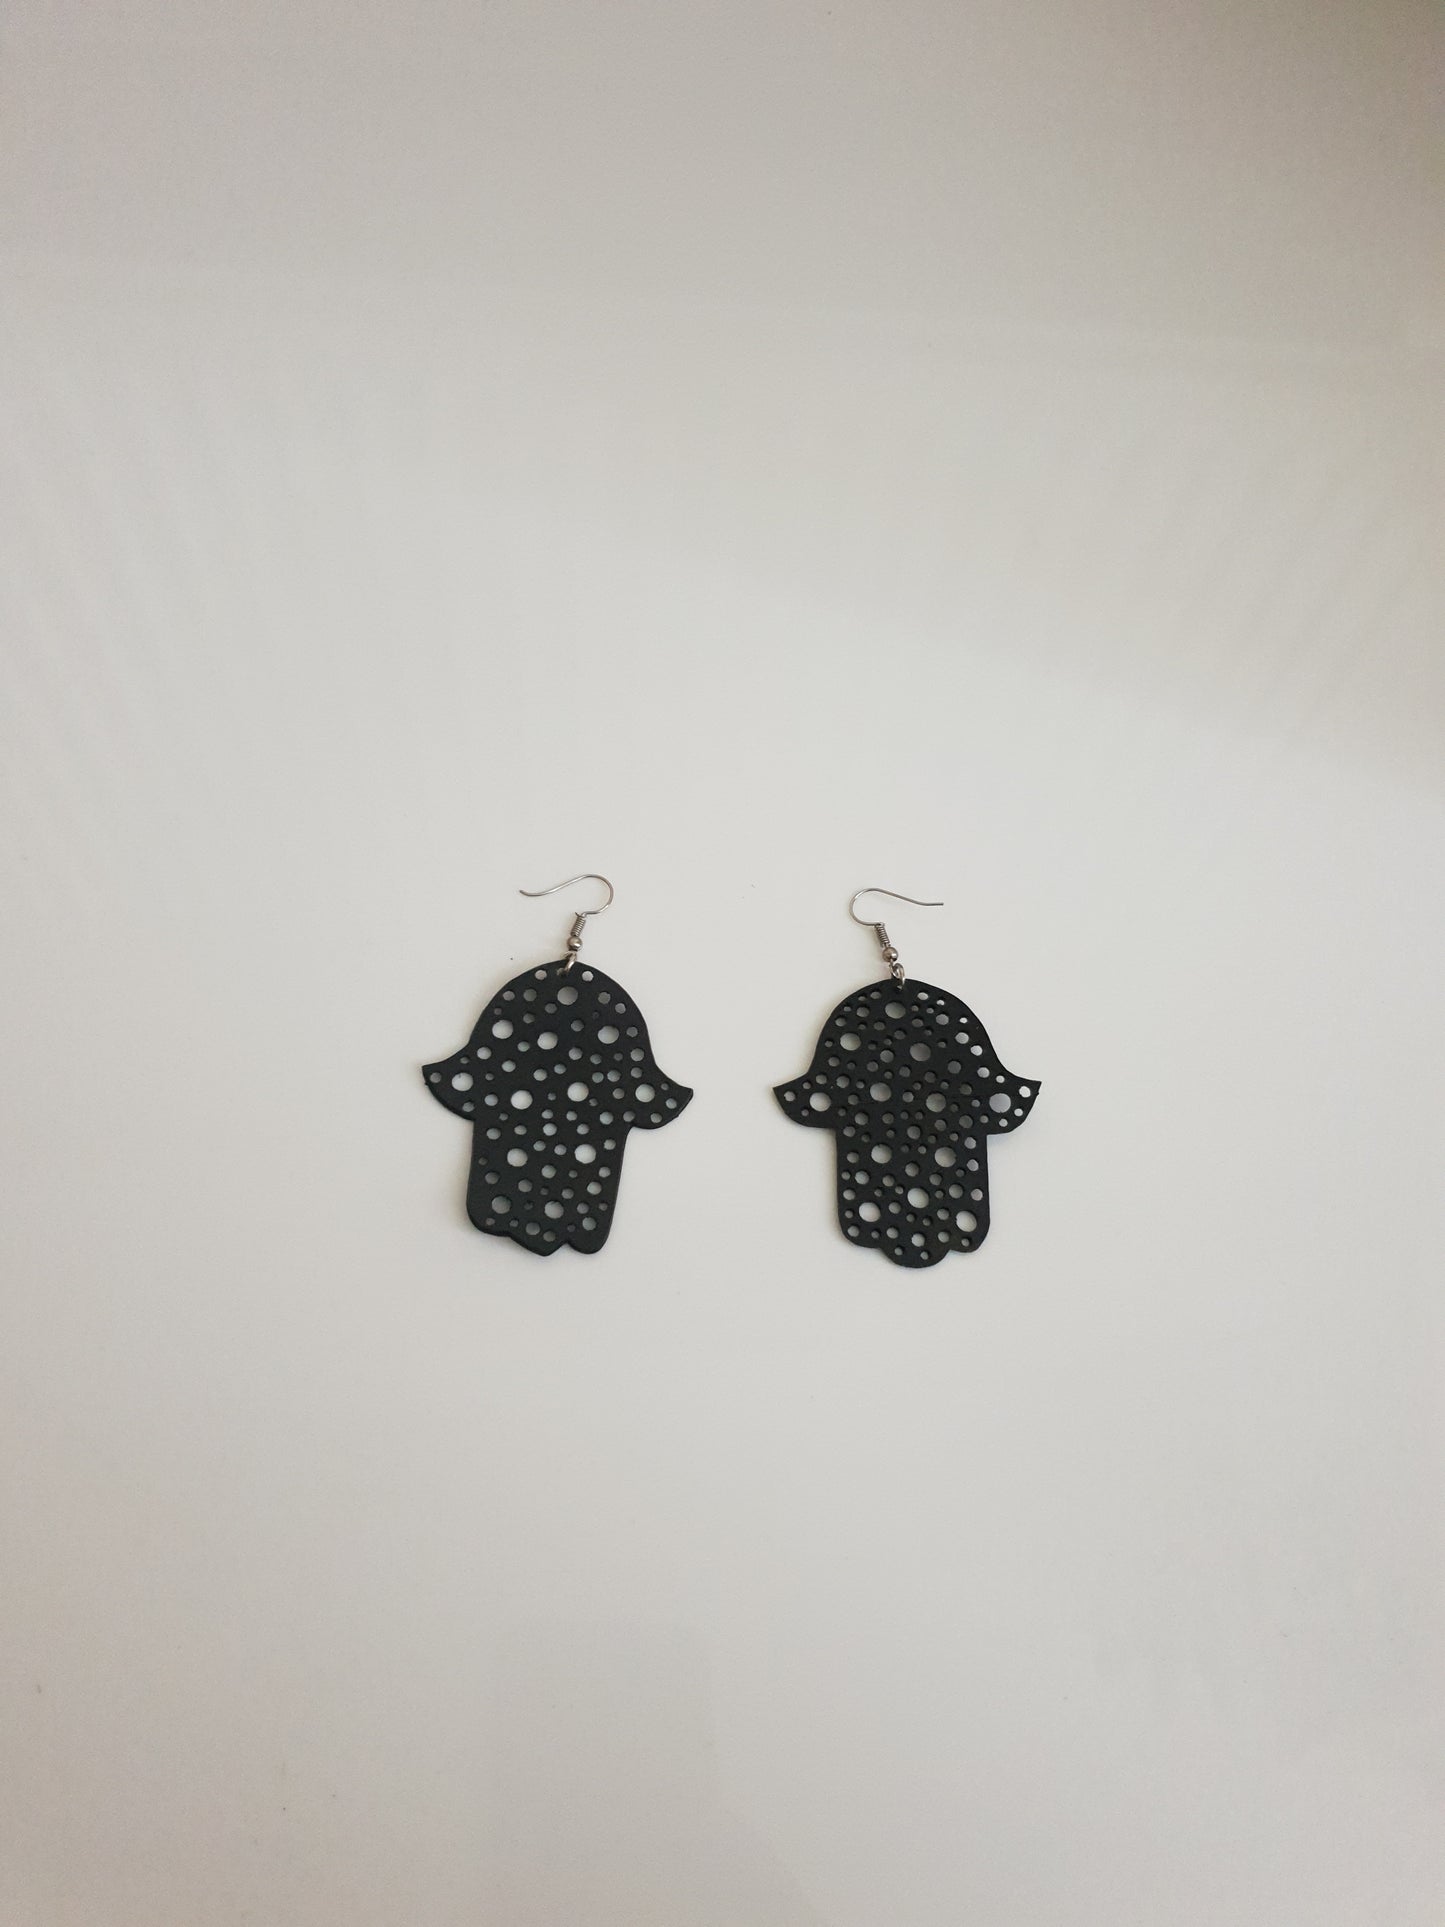 Hands of Hamsa up-cycled earrings - made from tyre rubber